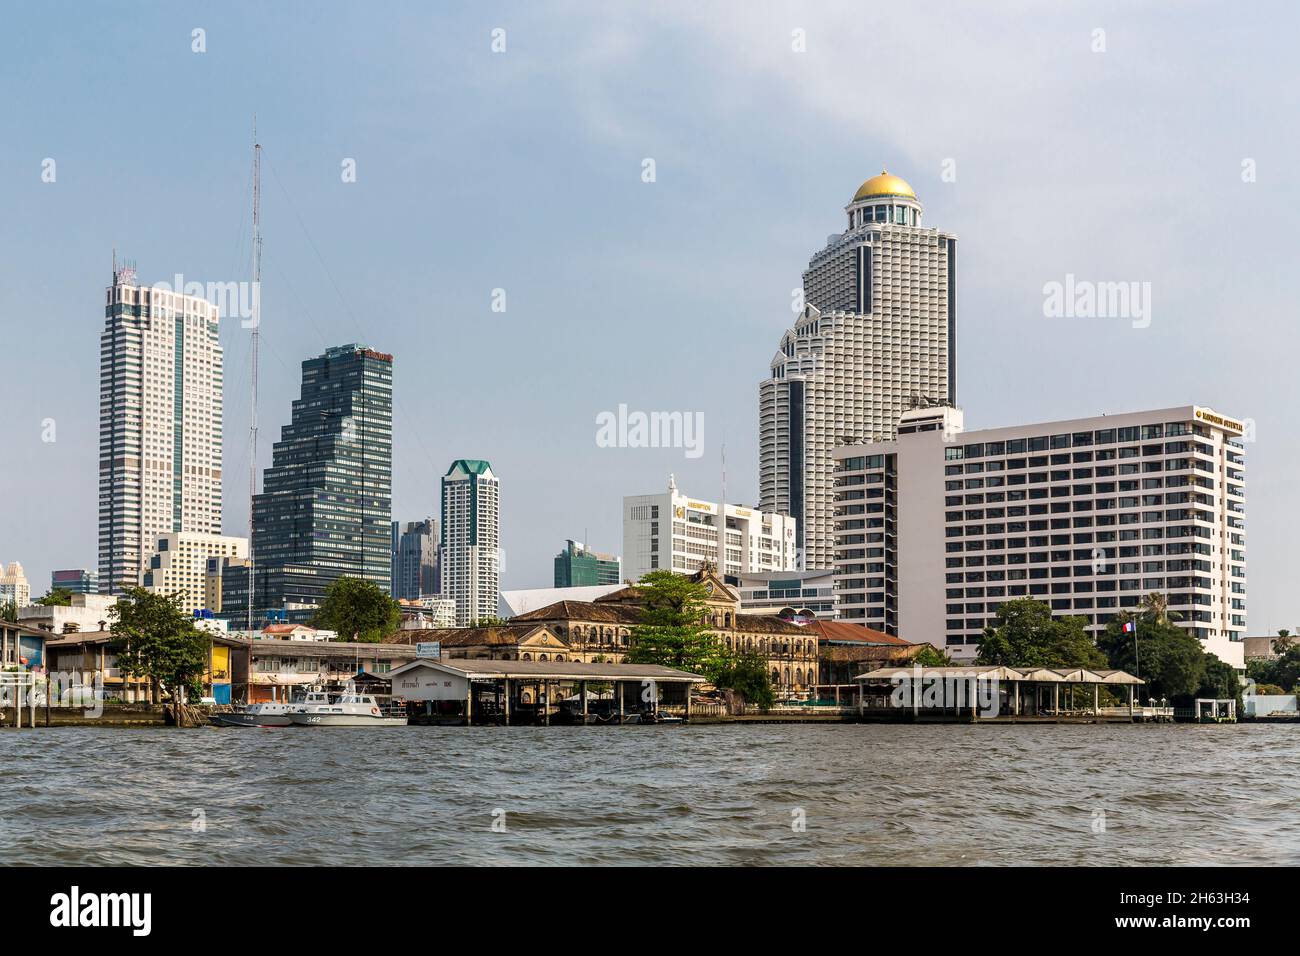 old customs house,colonial building,built 1888,at the back gems tower,assemption college,state tower,mandarin oriental hotel,chao phraya river,bangkok,thailand,asia Stock Photo